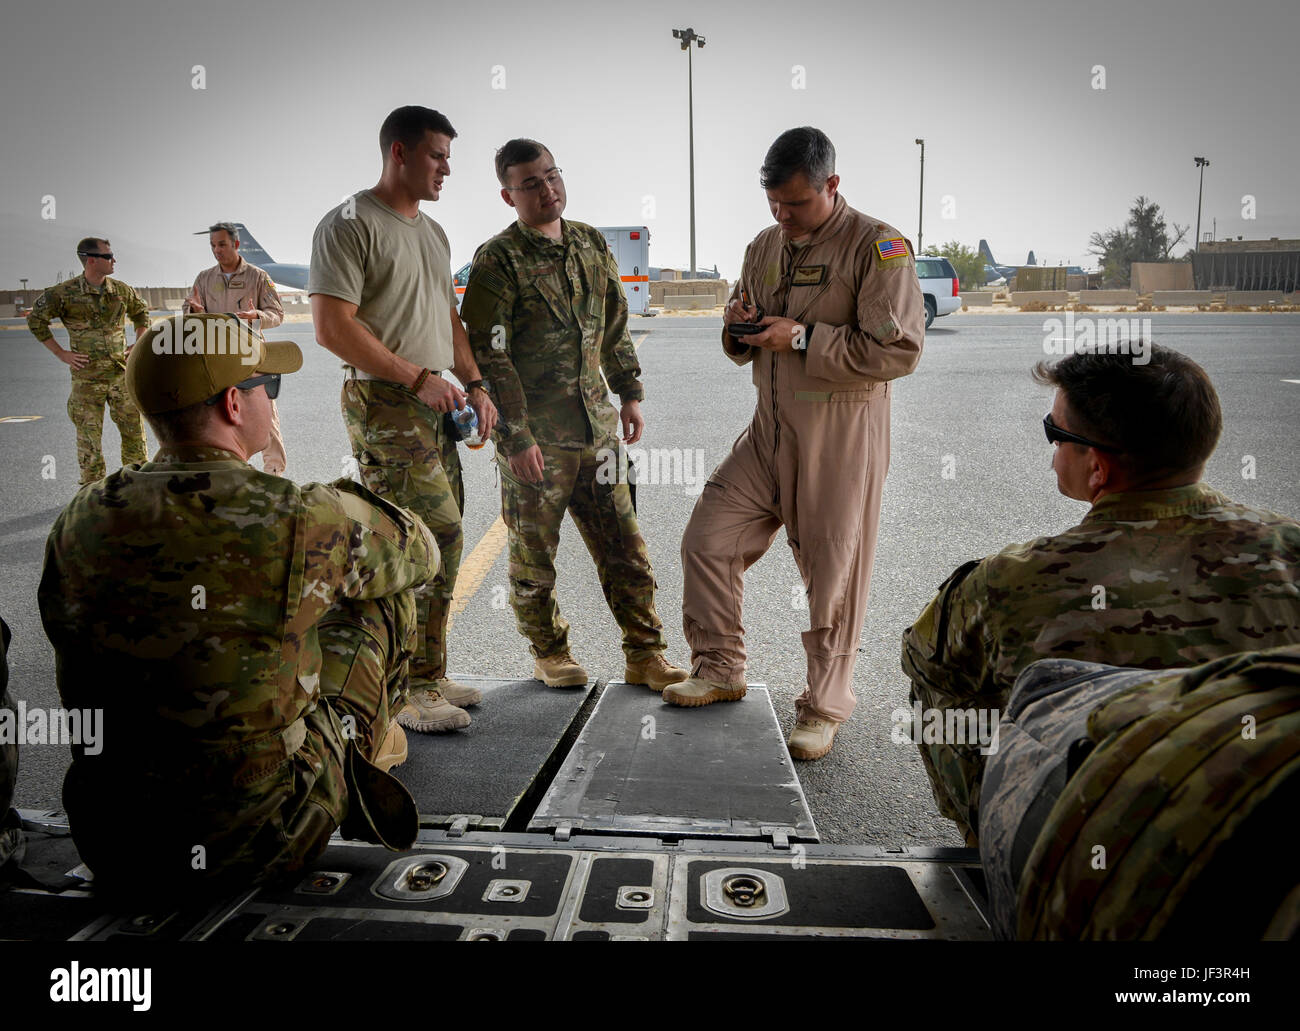 A pilot with the 746th Expeditionary Airlift Squadron holds a crew pre-flight brief while waiting on the arrival of patients May 19, 2017. The C-130 Hercules primarily performs the tactical portion of the airlift mission. The aircraft is capable of operating from rough, dirt strips and is the prime transport for airdropping troops and equipment into hostile areas. (U.S. Air Force photo by Staff Sgt. Michael Battles) Stock Photo